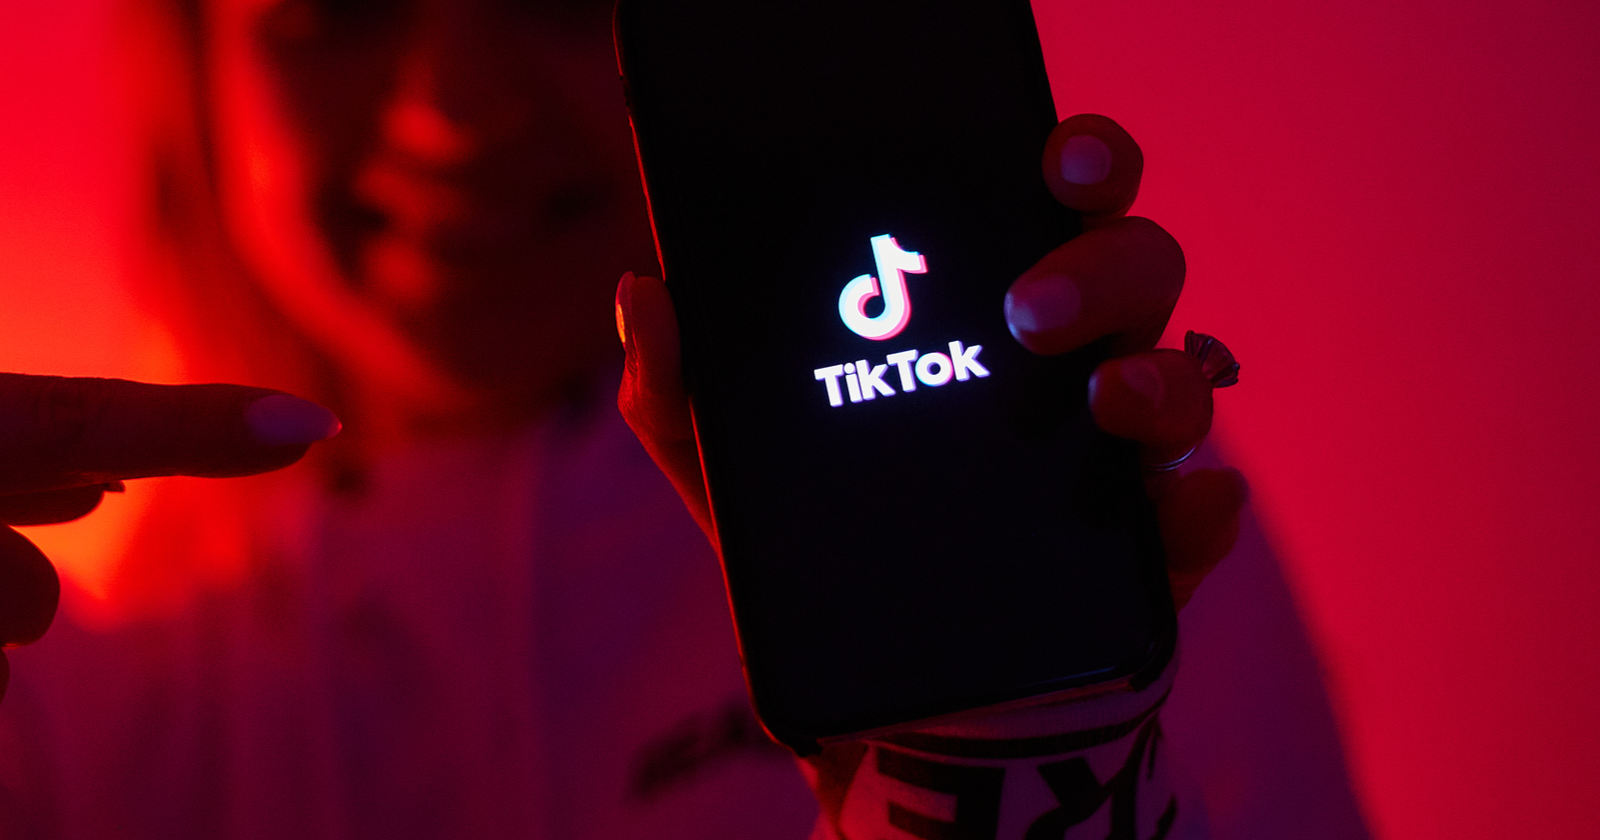 A Brief History Of TikTok And Its Rise To Popularity